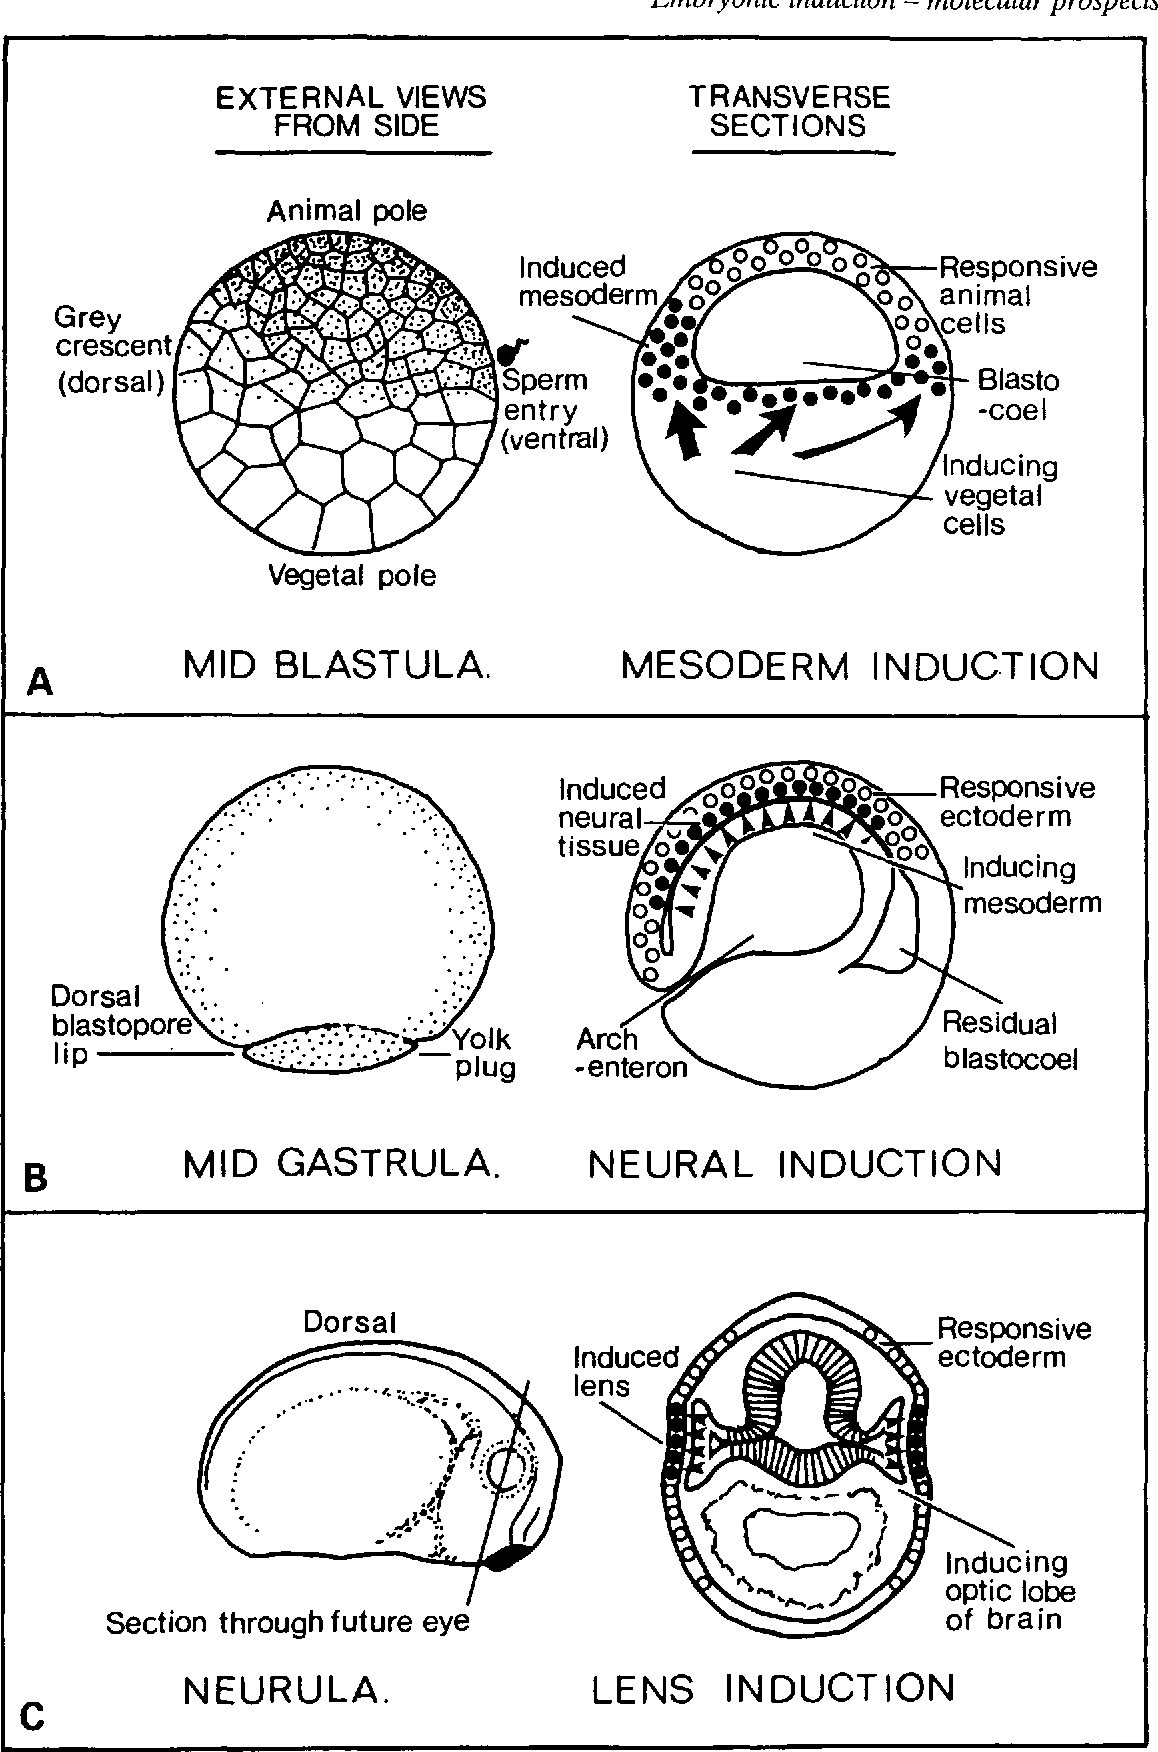 Embryonic induction - MEDizzy